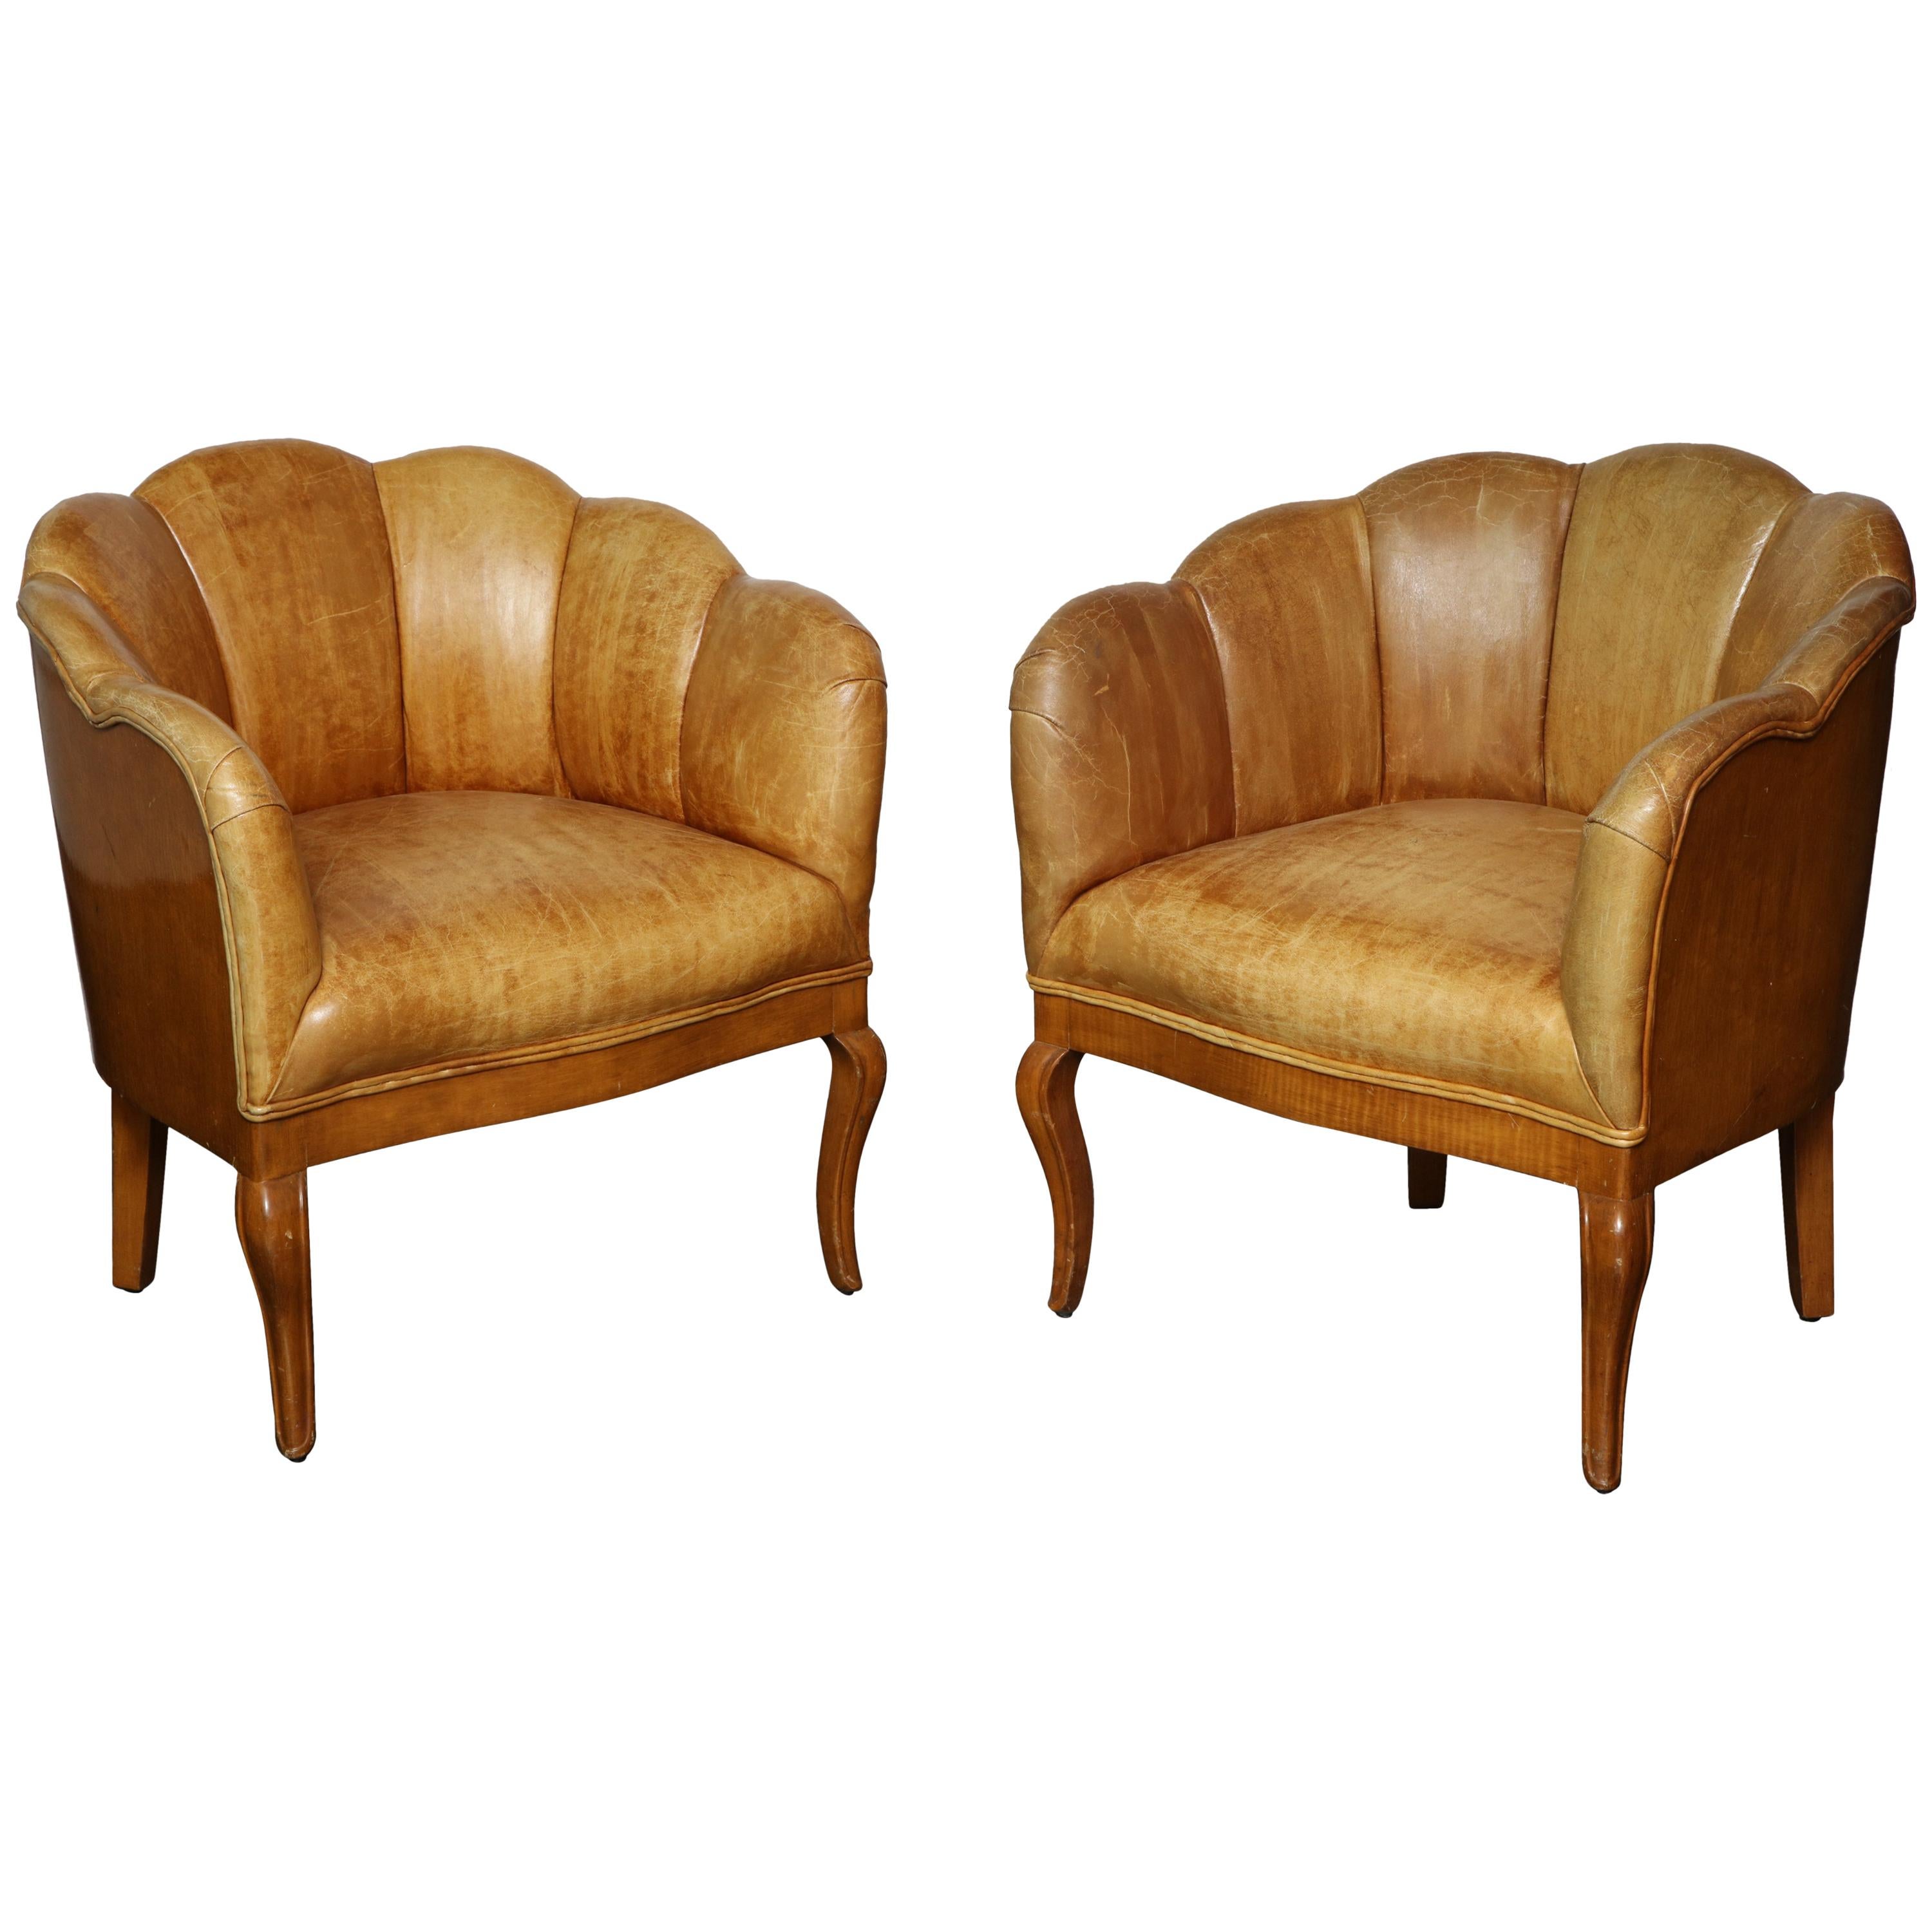 Pair of Vintage Leather Channel Back Petite Chairs